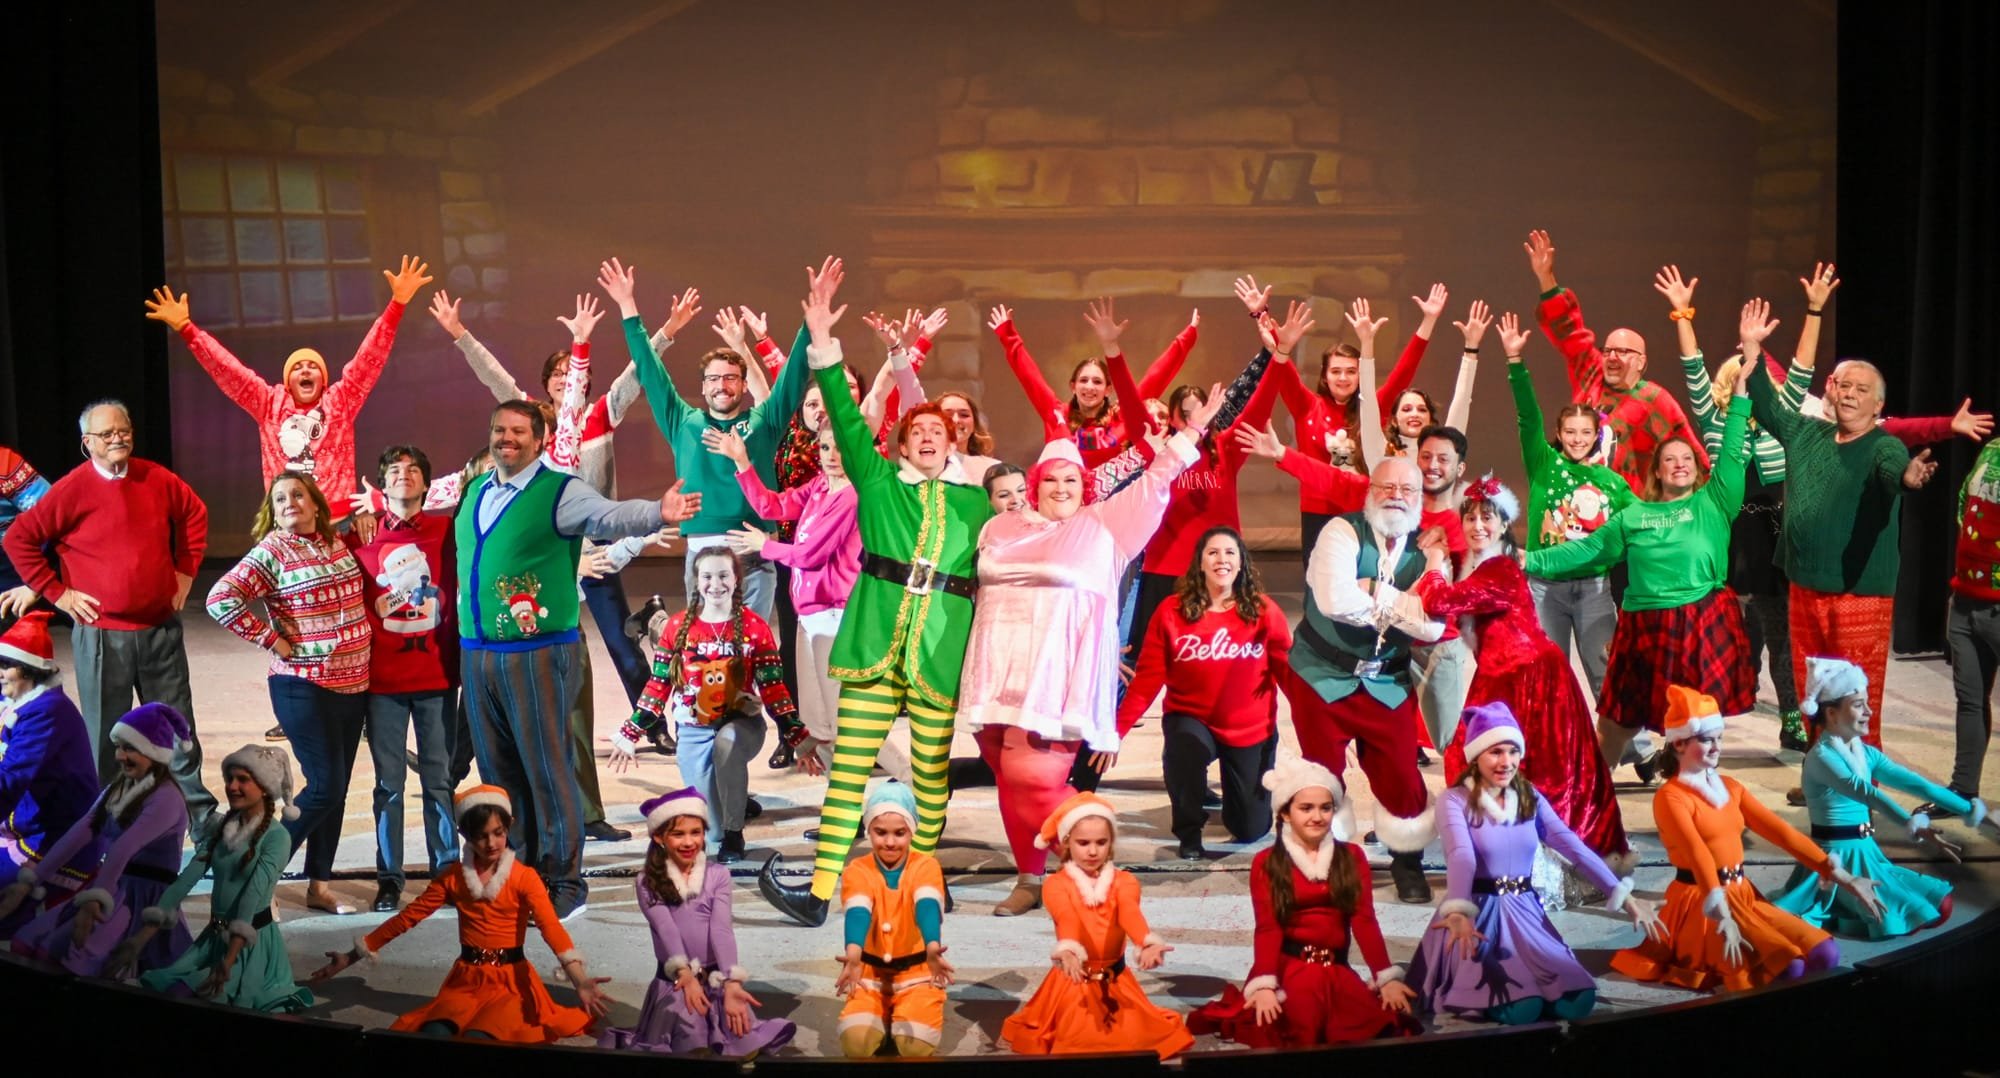 "Elf the Musical" - Meehan, Martin, Sklar & Beguelin - Theatre at the Mount (Gardner, MA.) - REVIEW